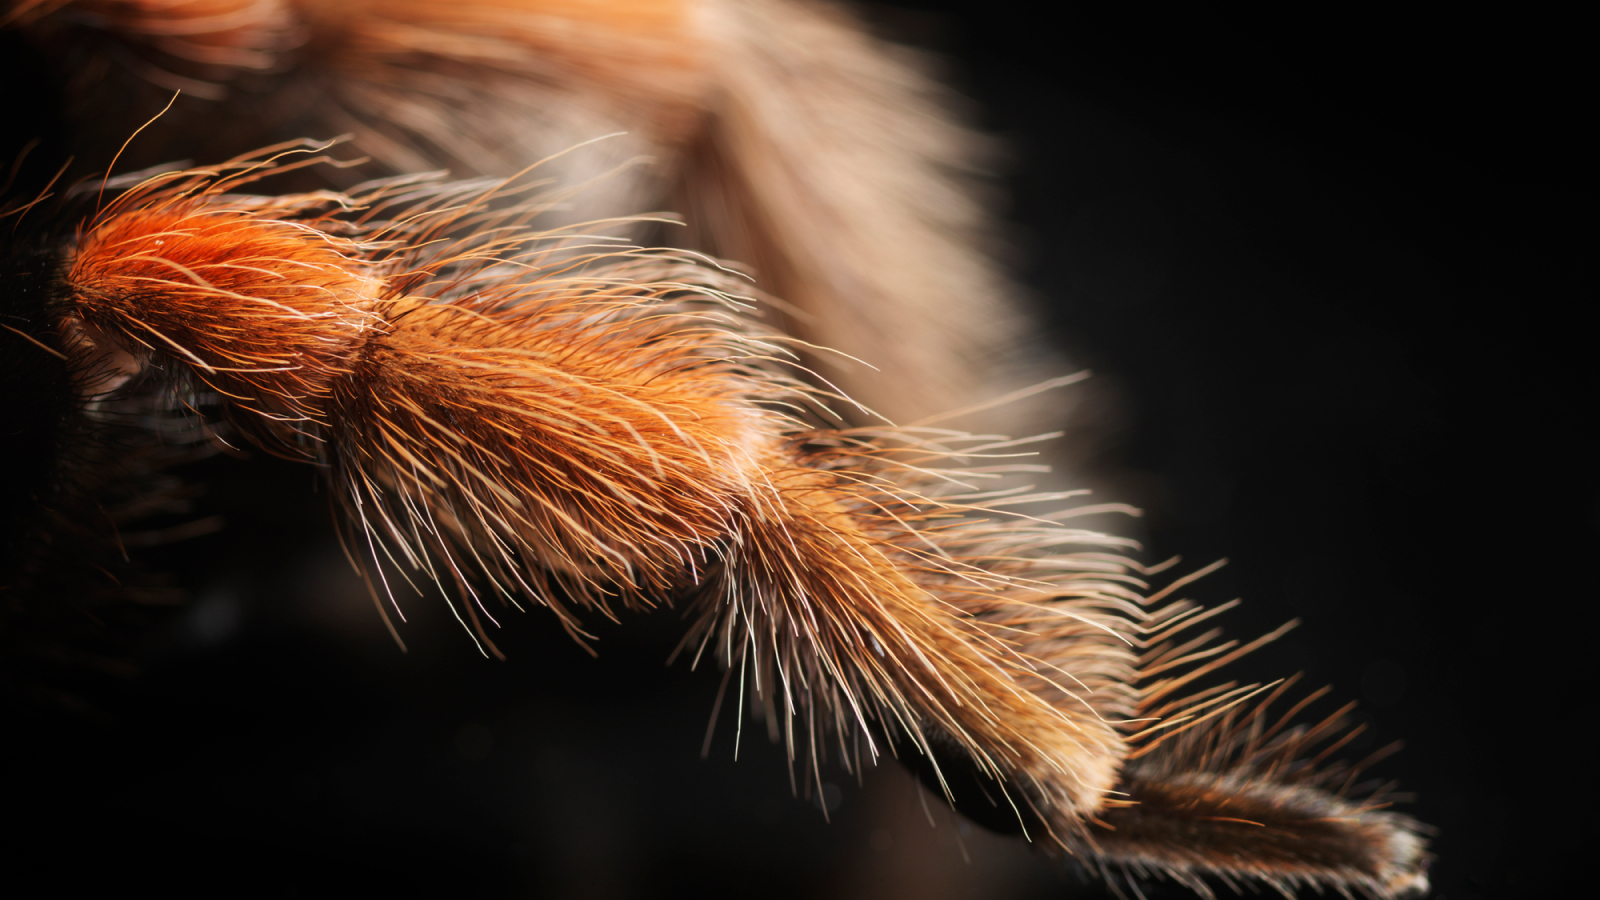 An image of a tarantulas leg that is covered in hairs